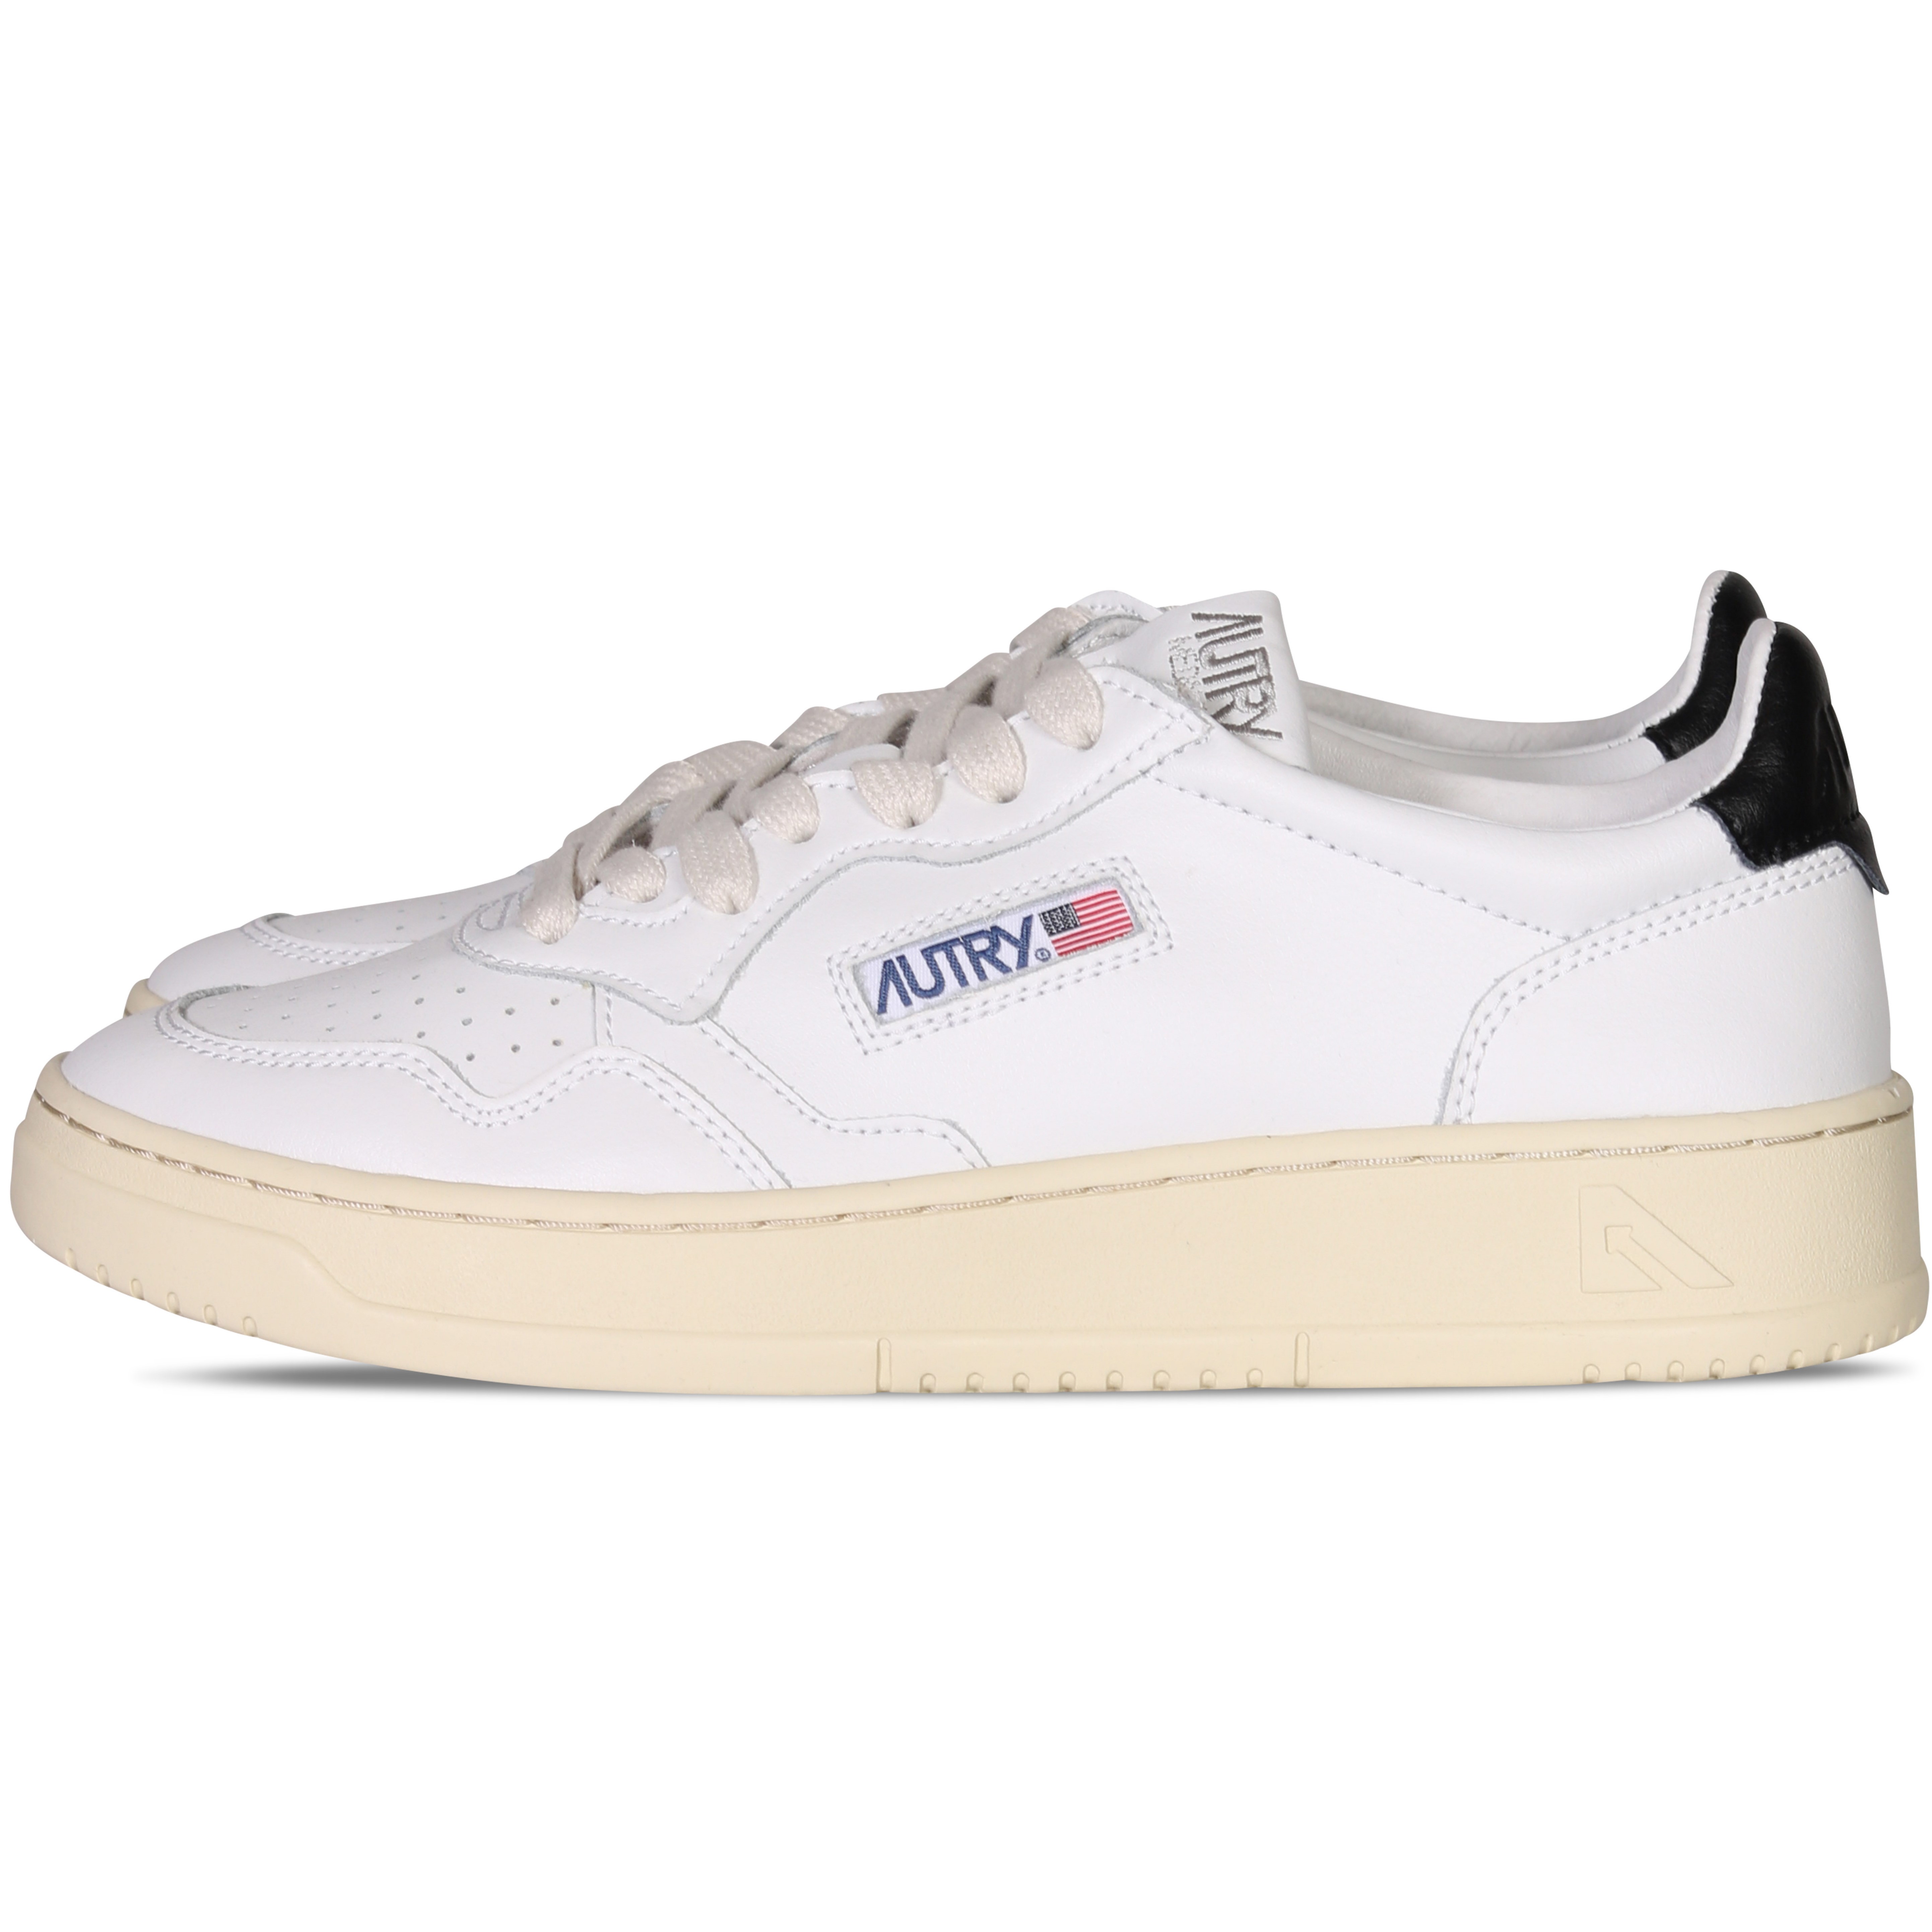 AUTRY ACTION SHOES Low Sneaker in White/Black